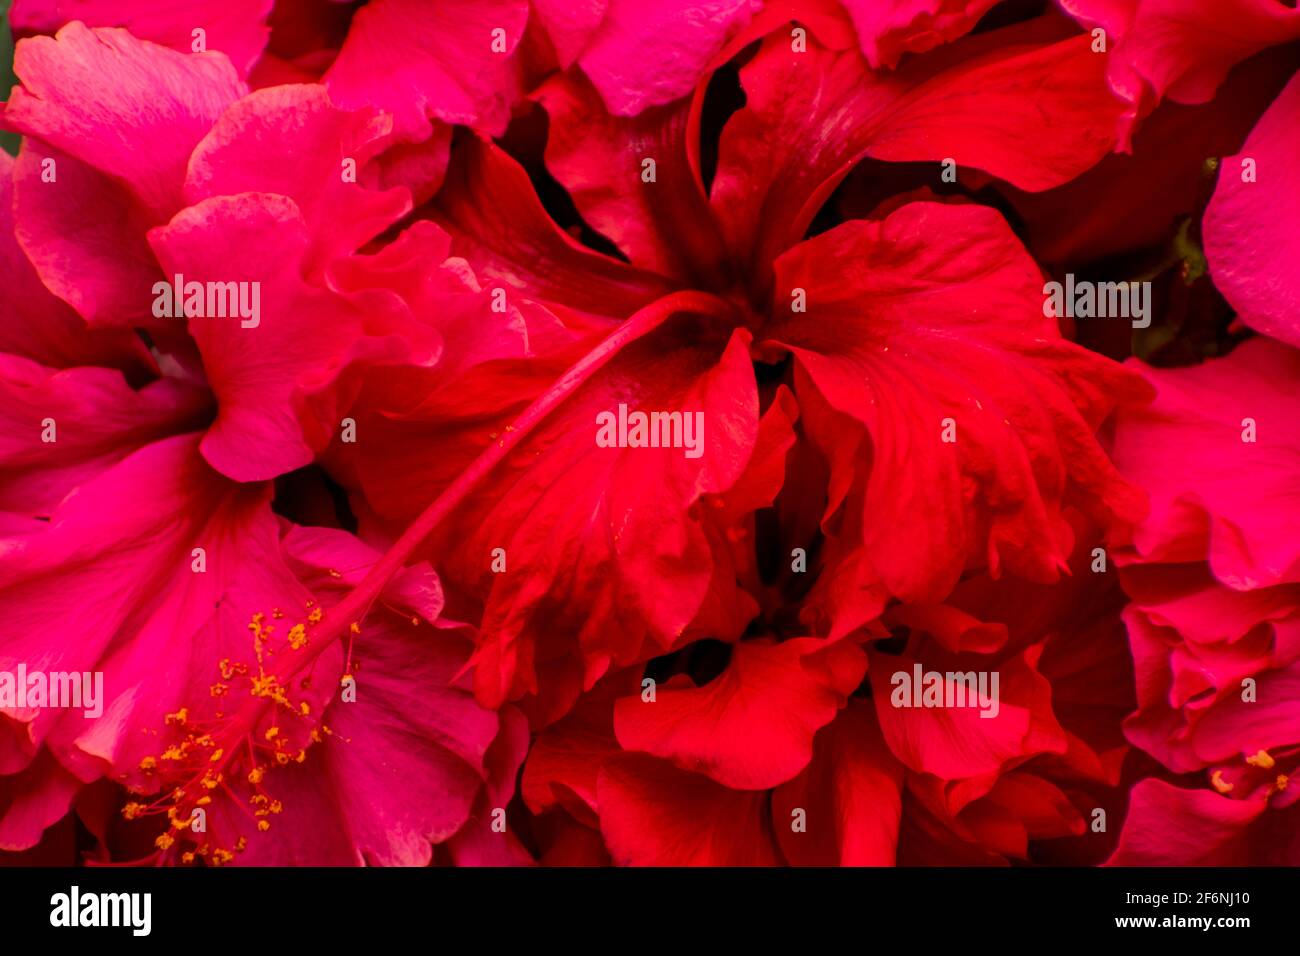 Indian jaba flower also know as hibiscus, rose mallow, hardy hibiscus, rose of sharon, and tropical hibiscus. Stock Photo